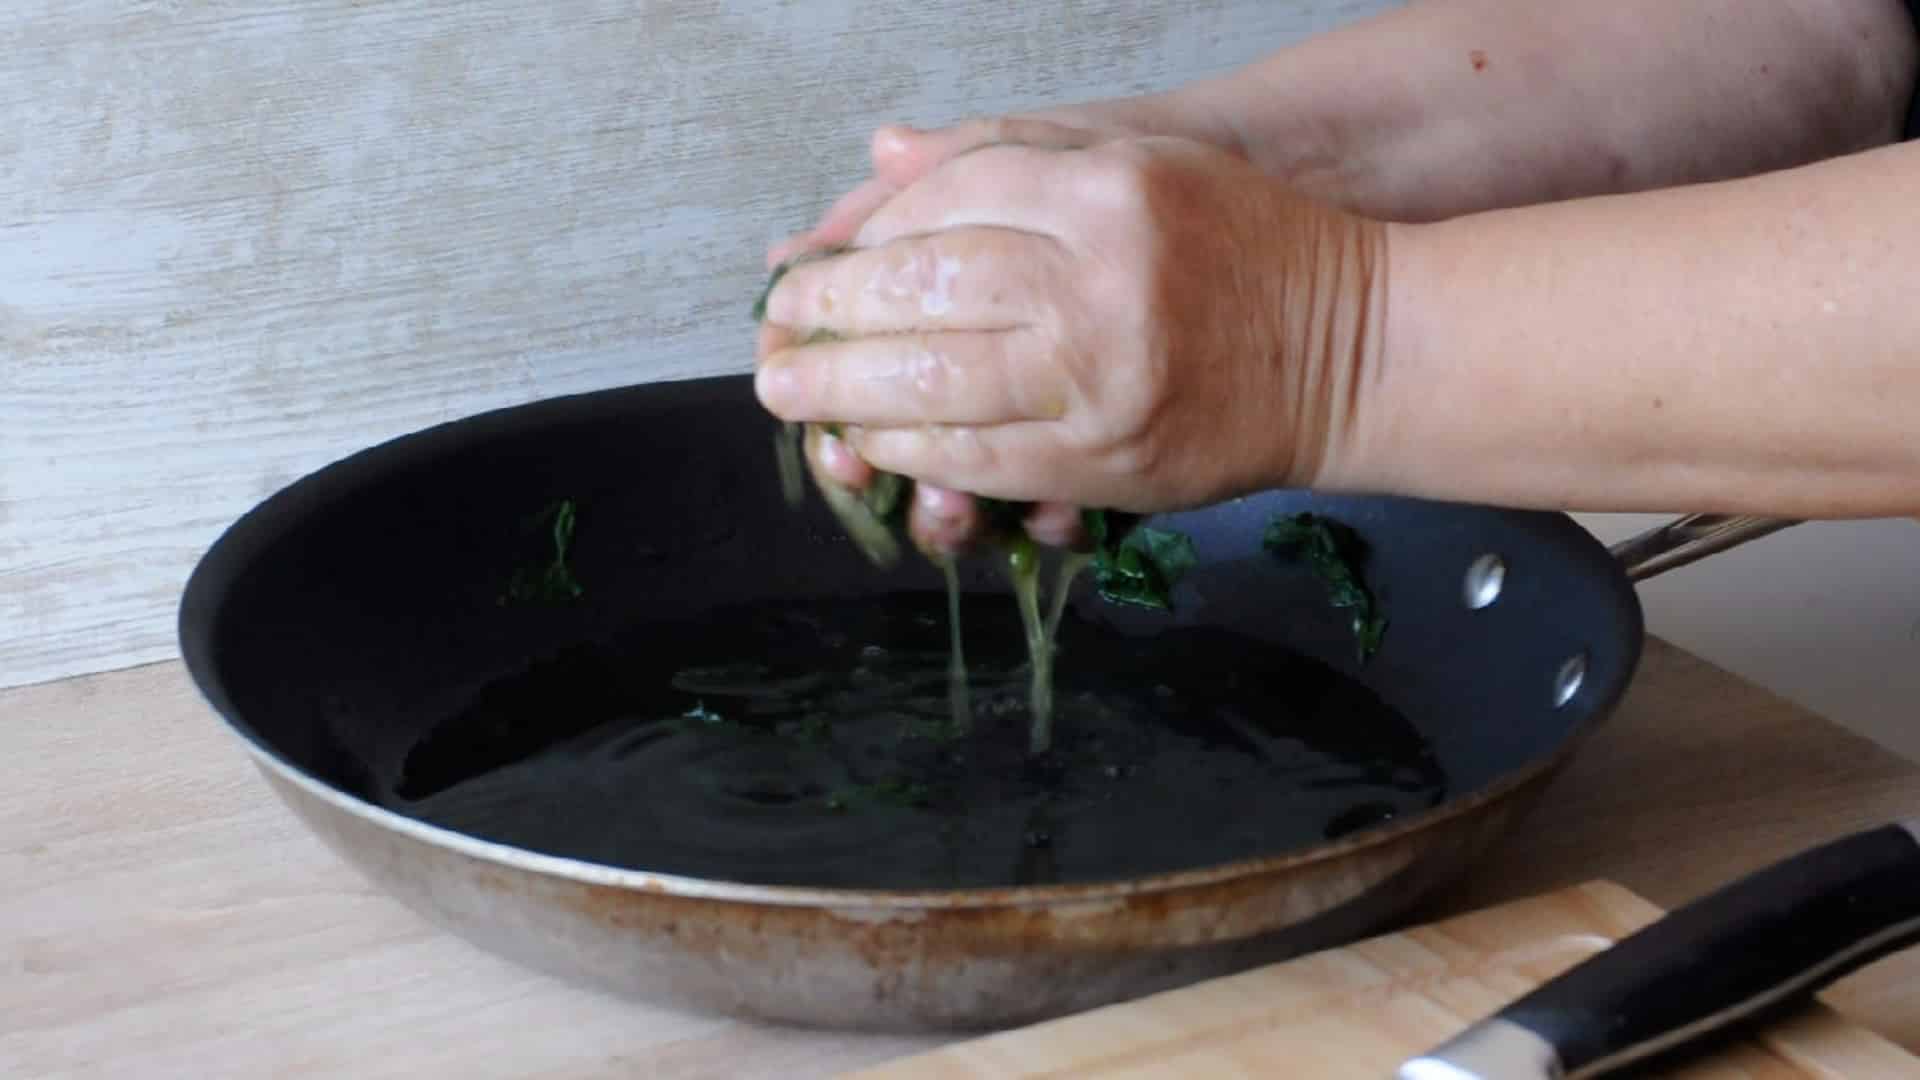 squeezing out the water from the spinach